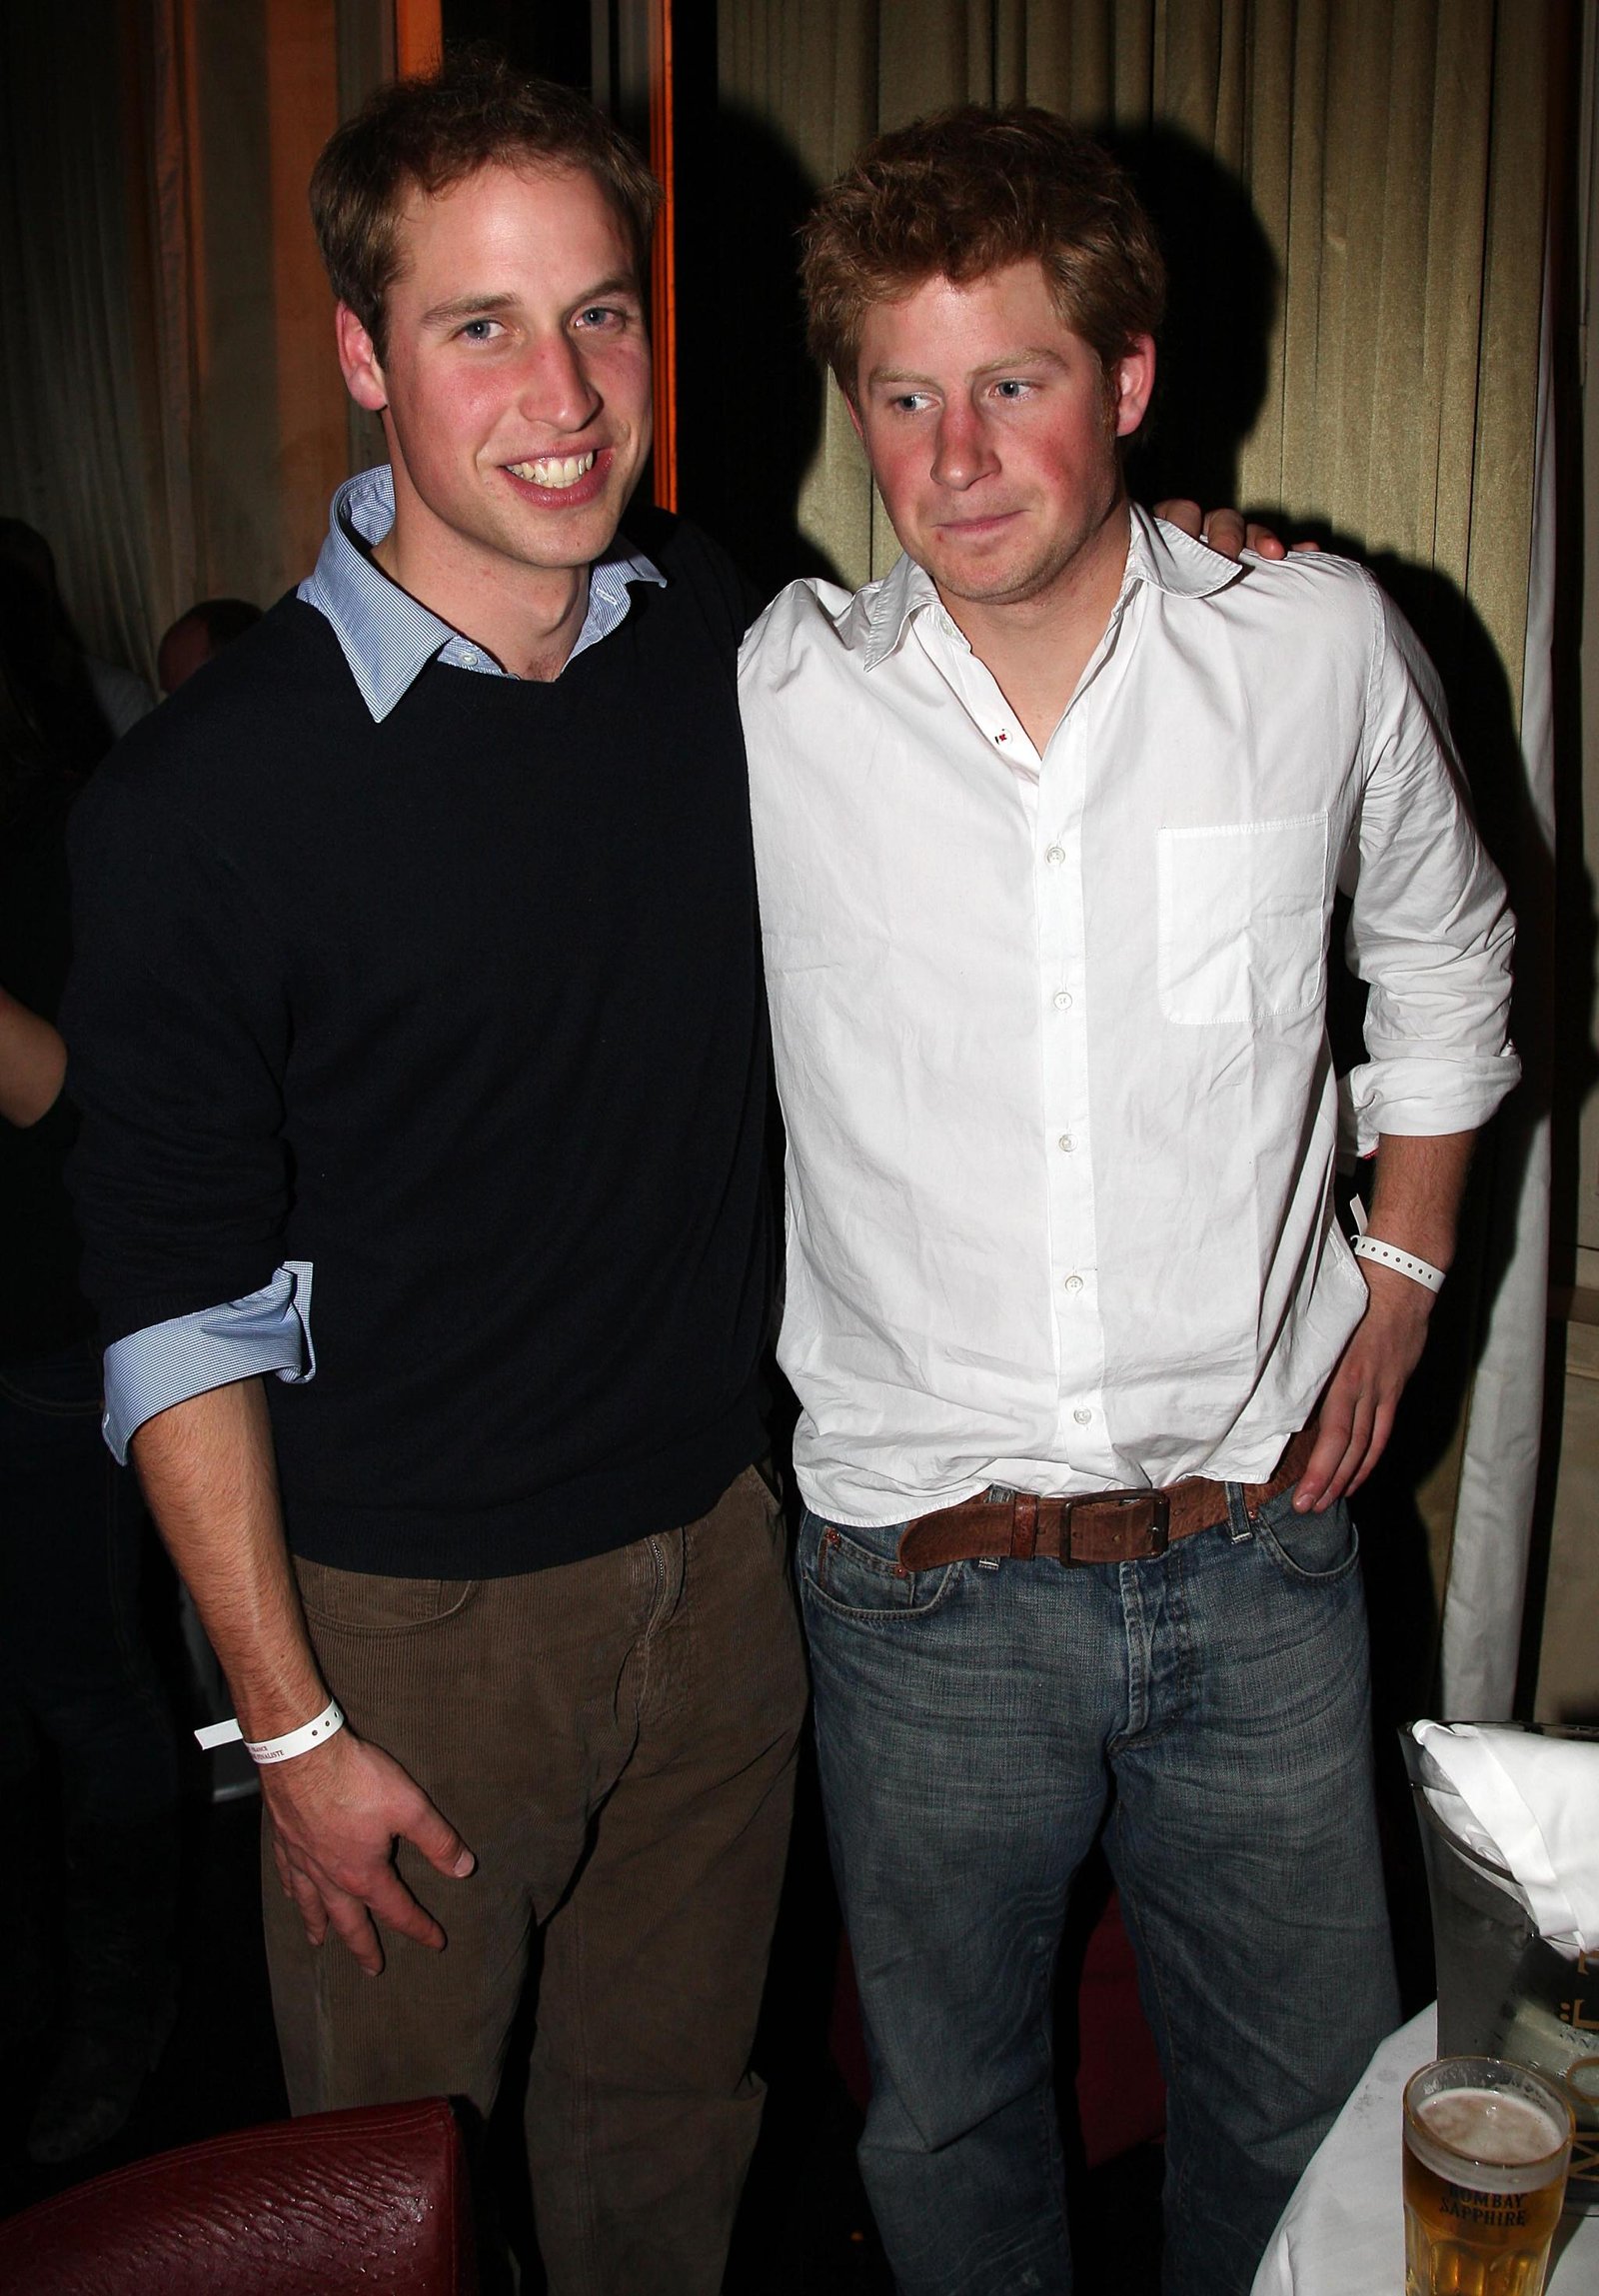 Prince WIlliam and Prince Harry posing for a photo together 